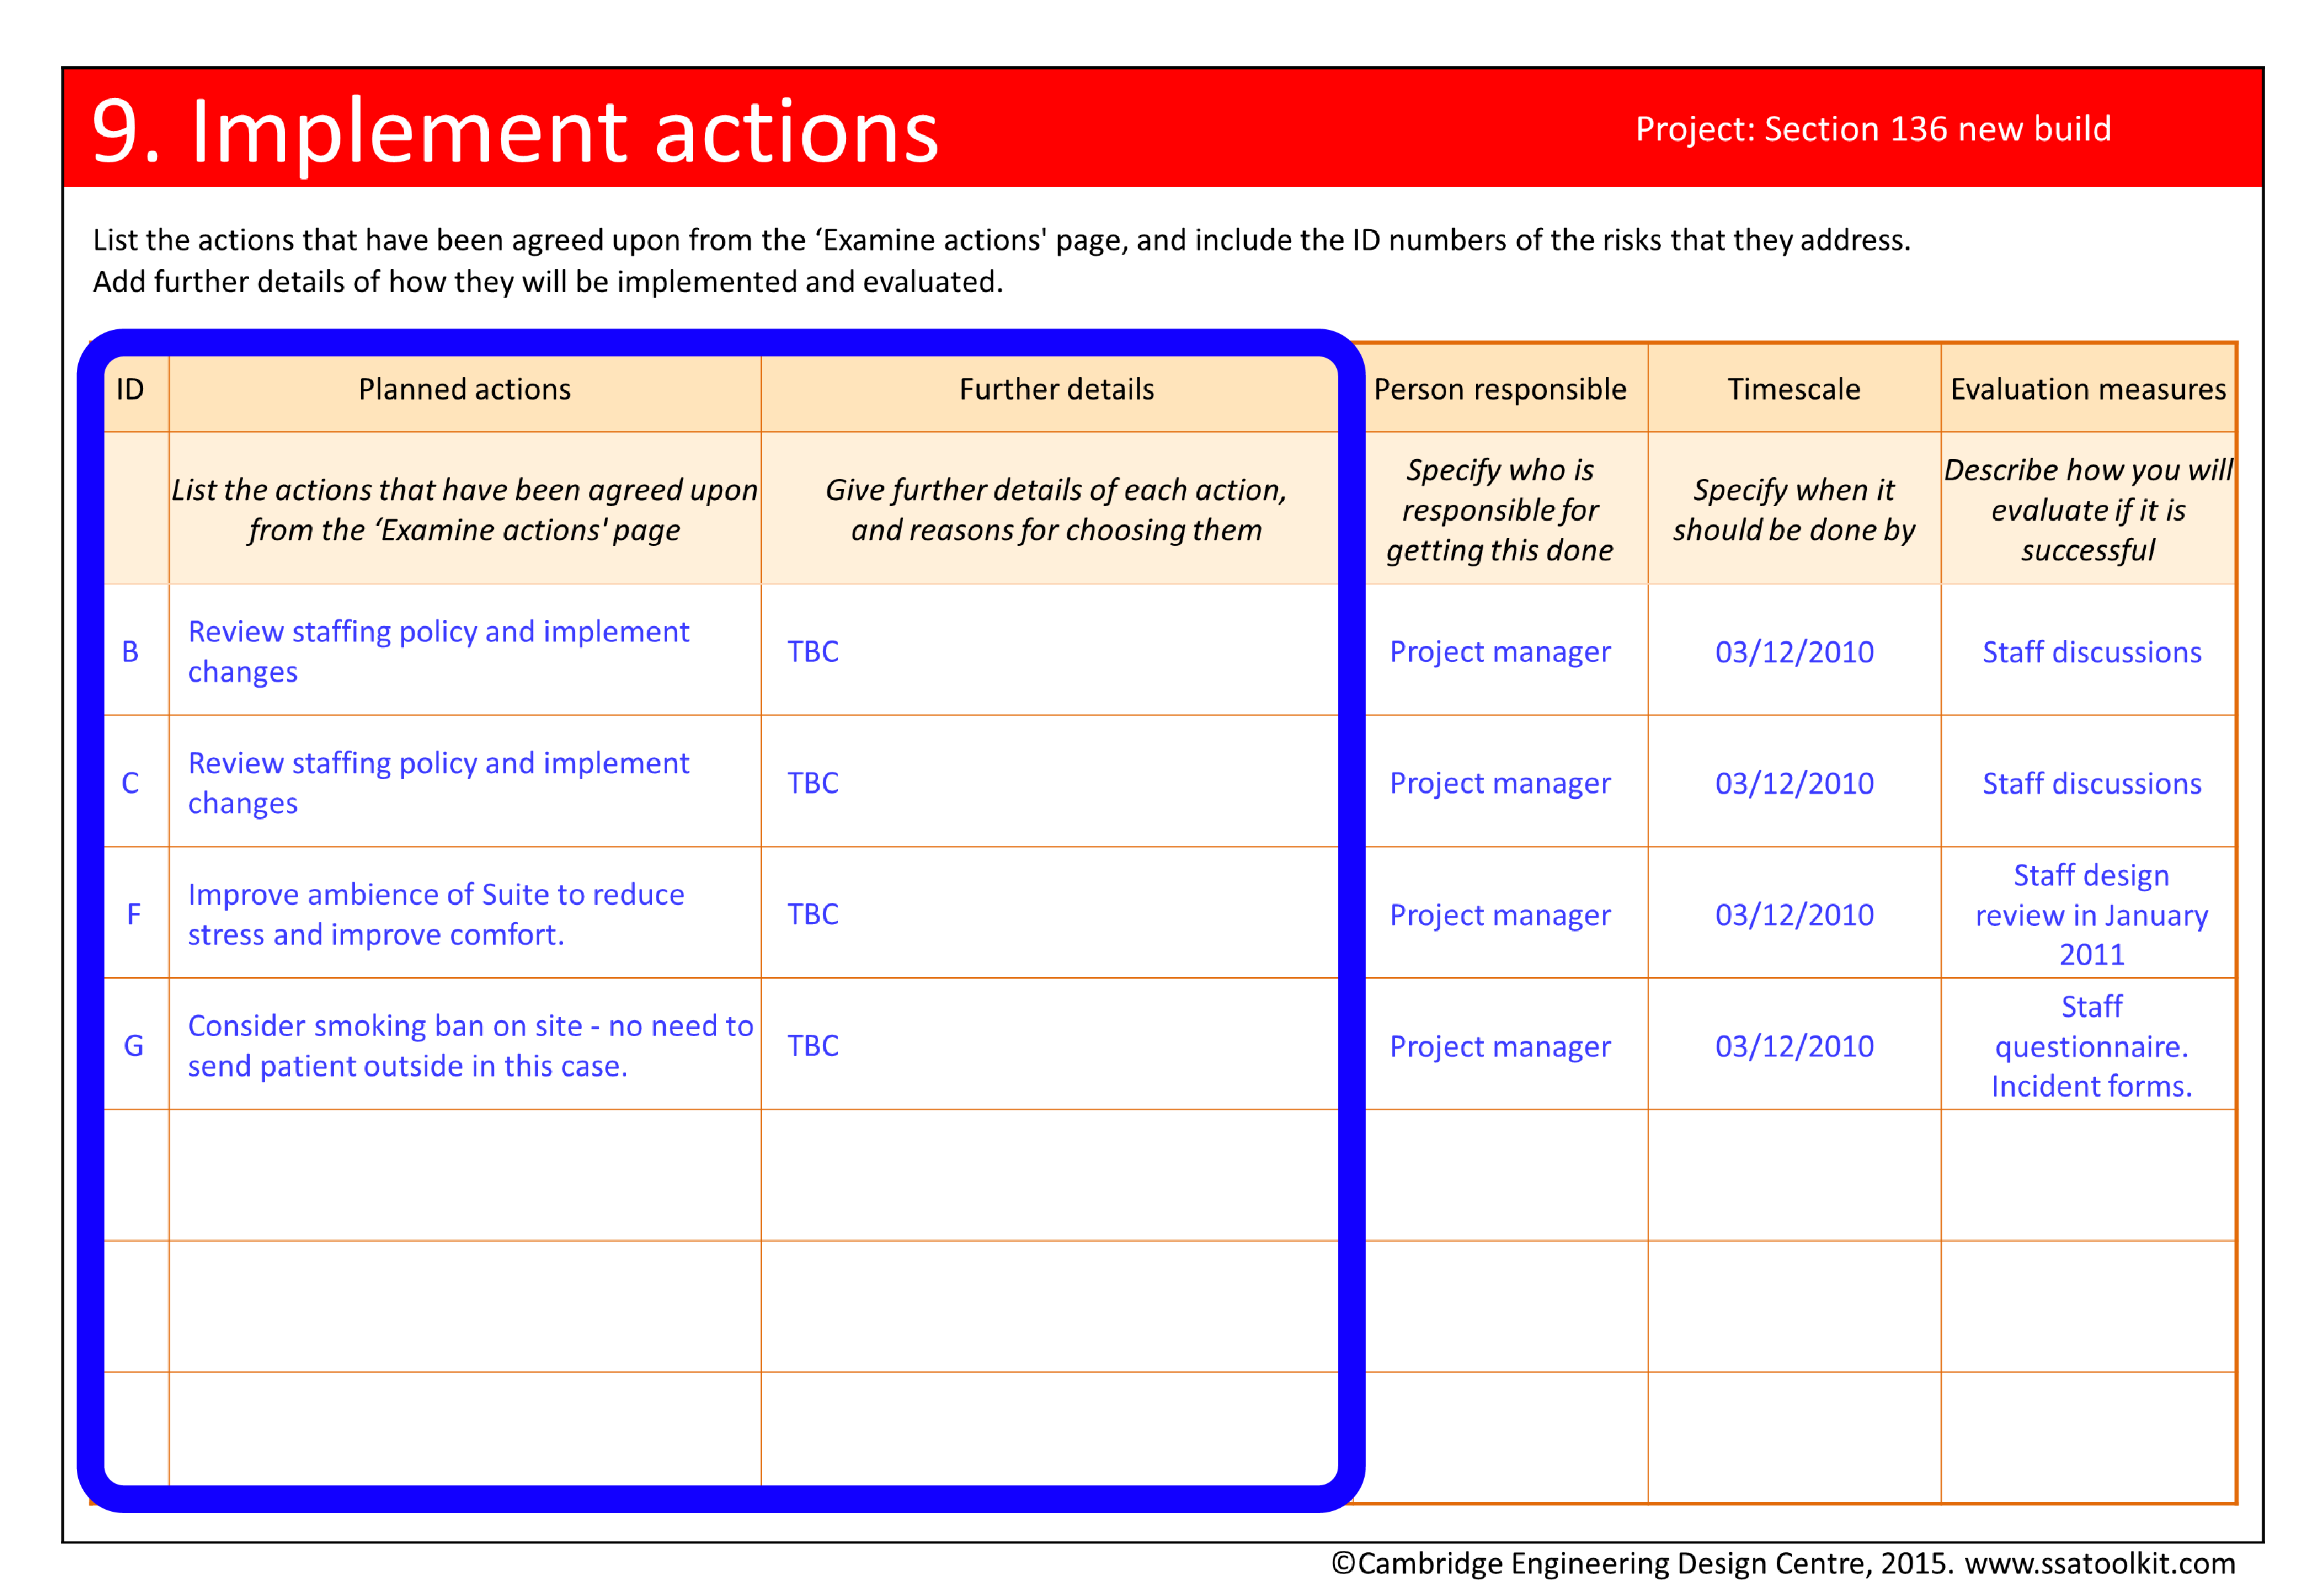 Screenshot of the Implement actions page from the Section 136 case study. The columns for Planned actions and Further details are circled. Planned actions are: Review staffing policy and implement changes, Improve ambience of Suite to reduce stress and improve comfort, and Consider smoking ban on site - no need to send patient outside in this case. The further details column says TBC (To be Completed) in it. The full form in pdf is available from the Resources page.